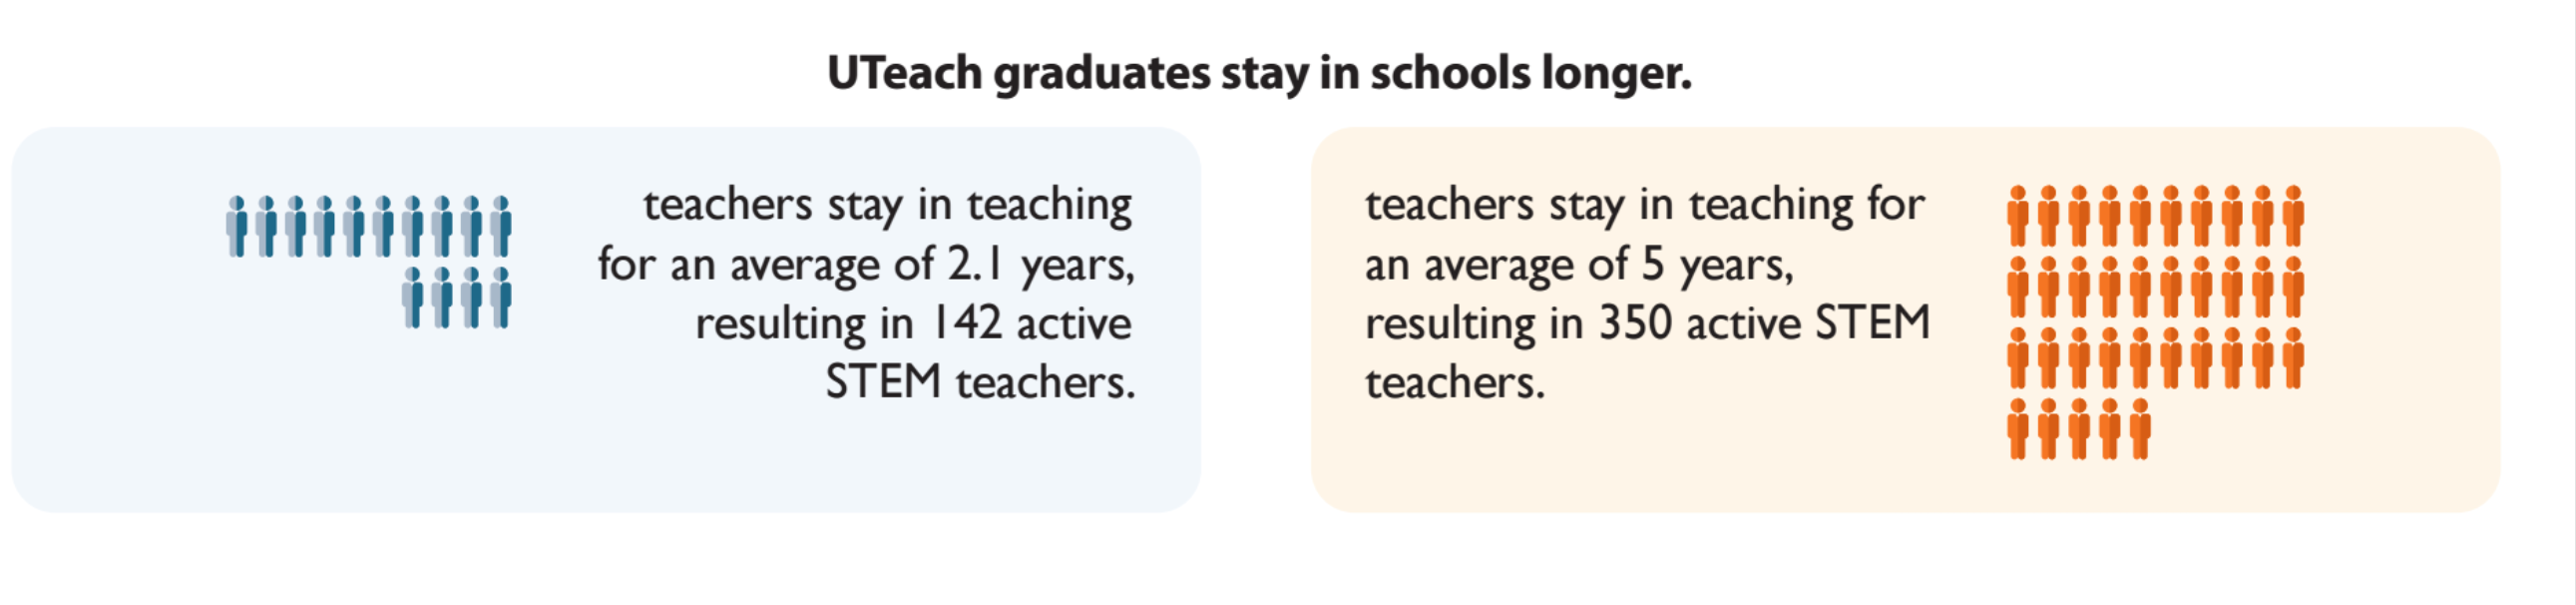 UTeach students will remain employed in the teaching profession longer than traditional teachers.